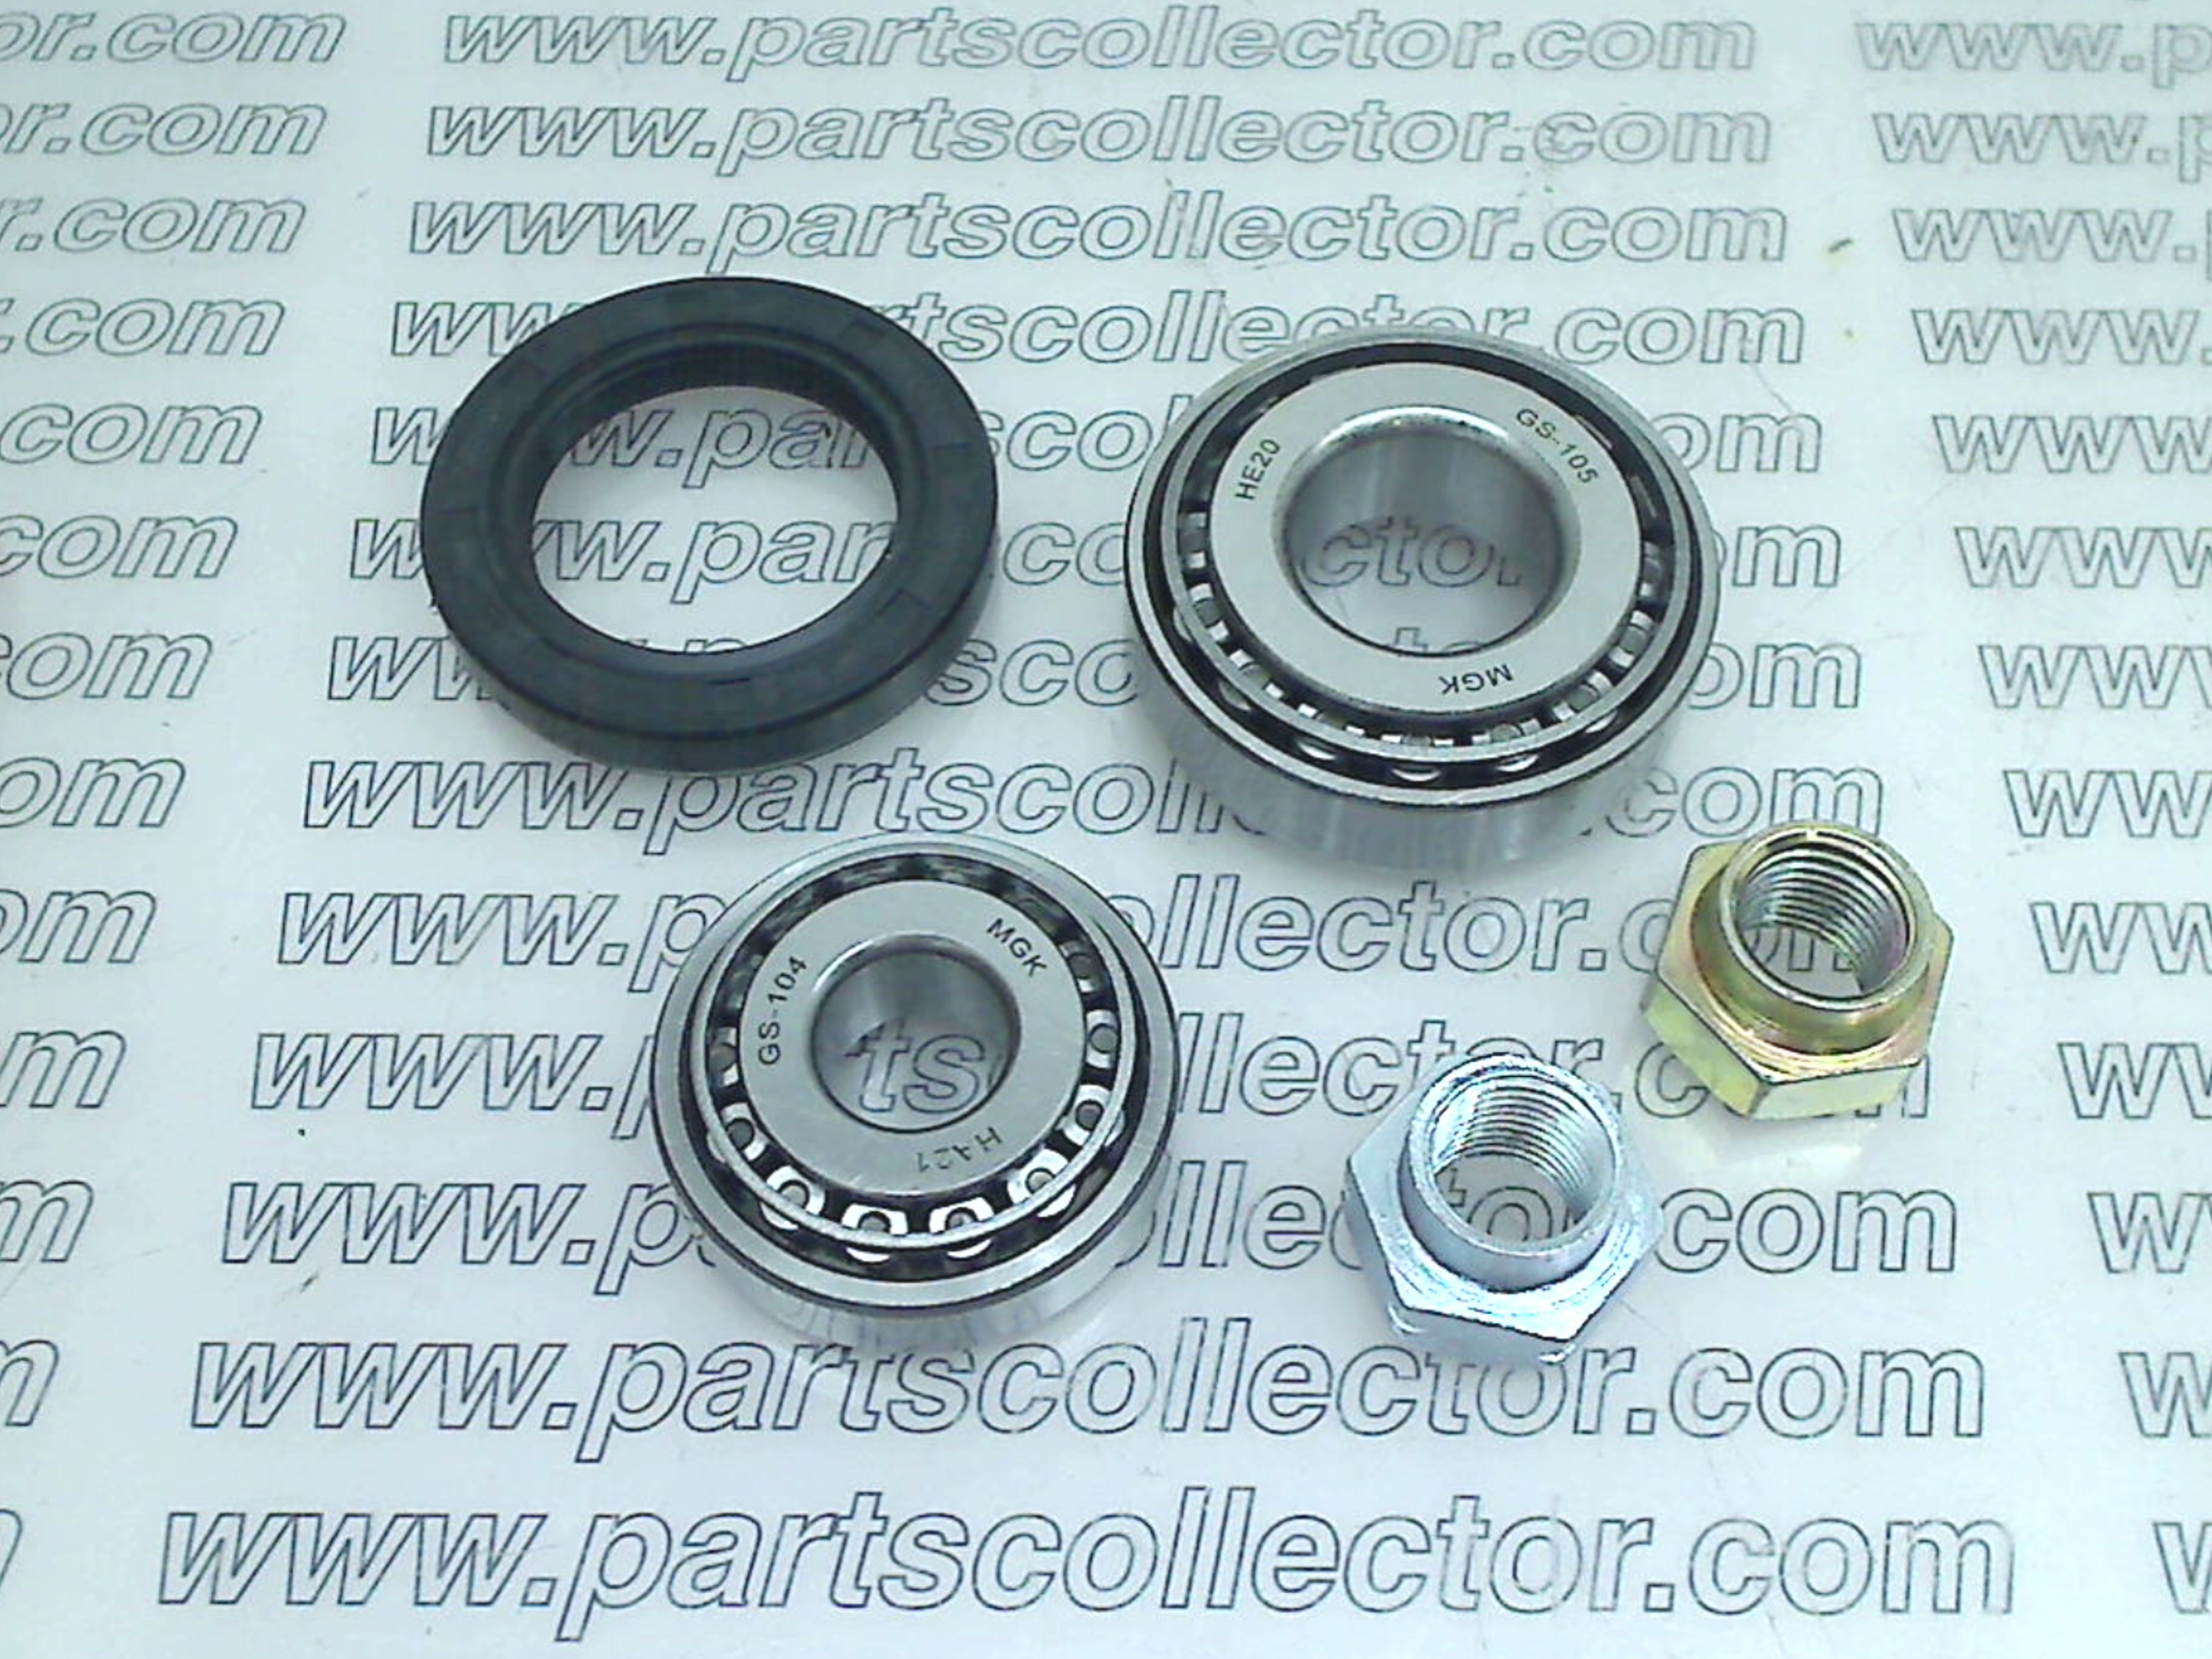 FRONT WHEEL BEARING KIT FOR FIAT 850 COUPE SPIDER 126